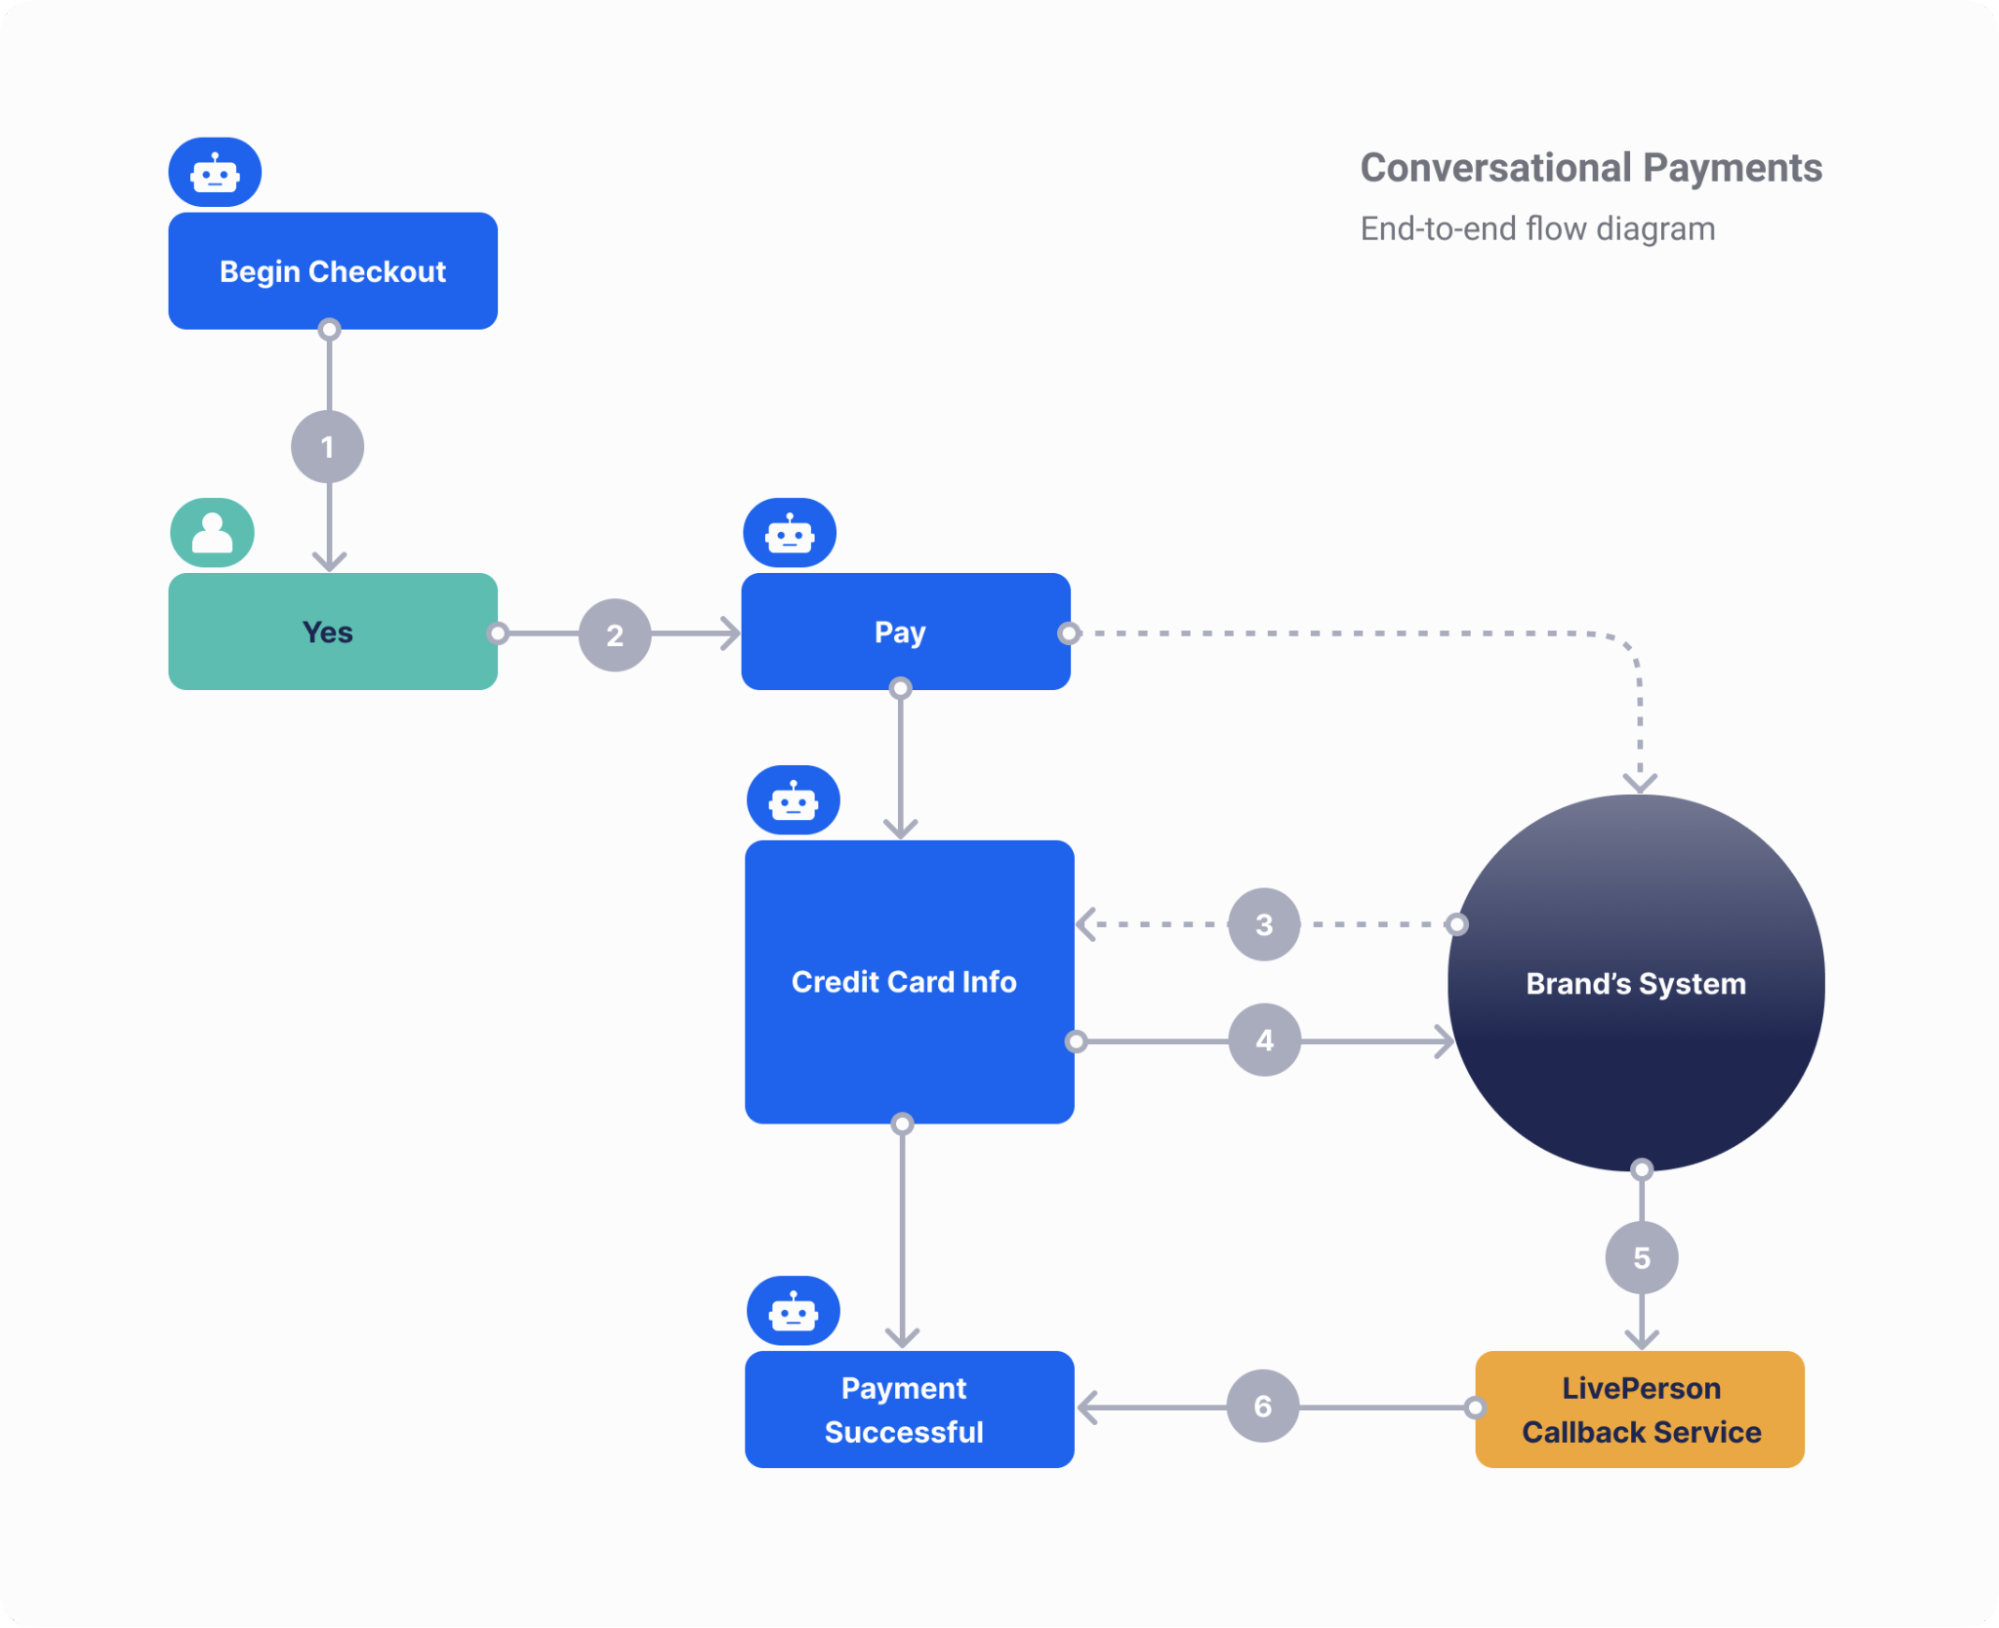 The end-to-end flow diagram for conversational payments